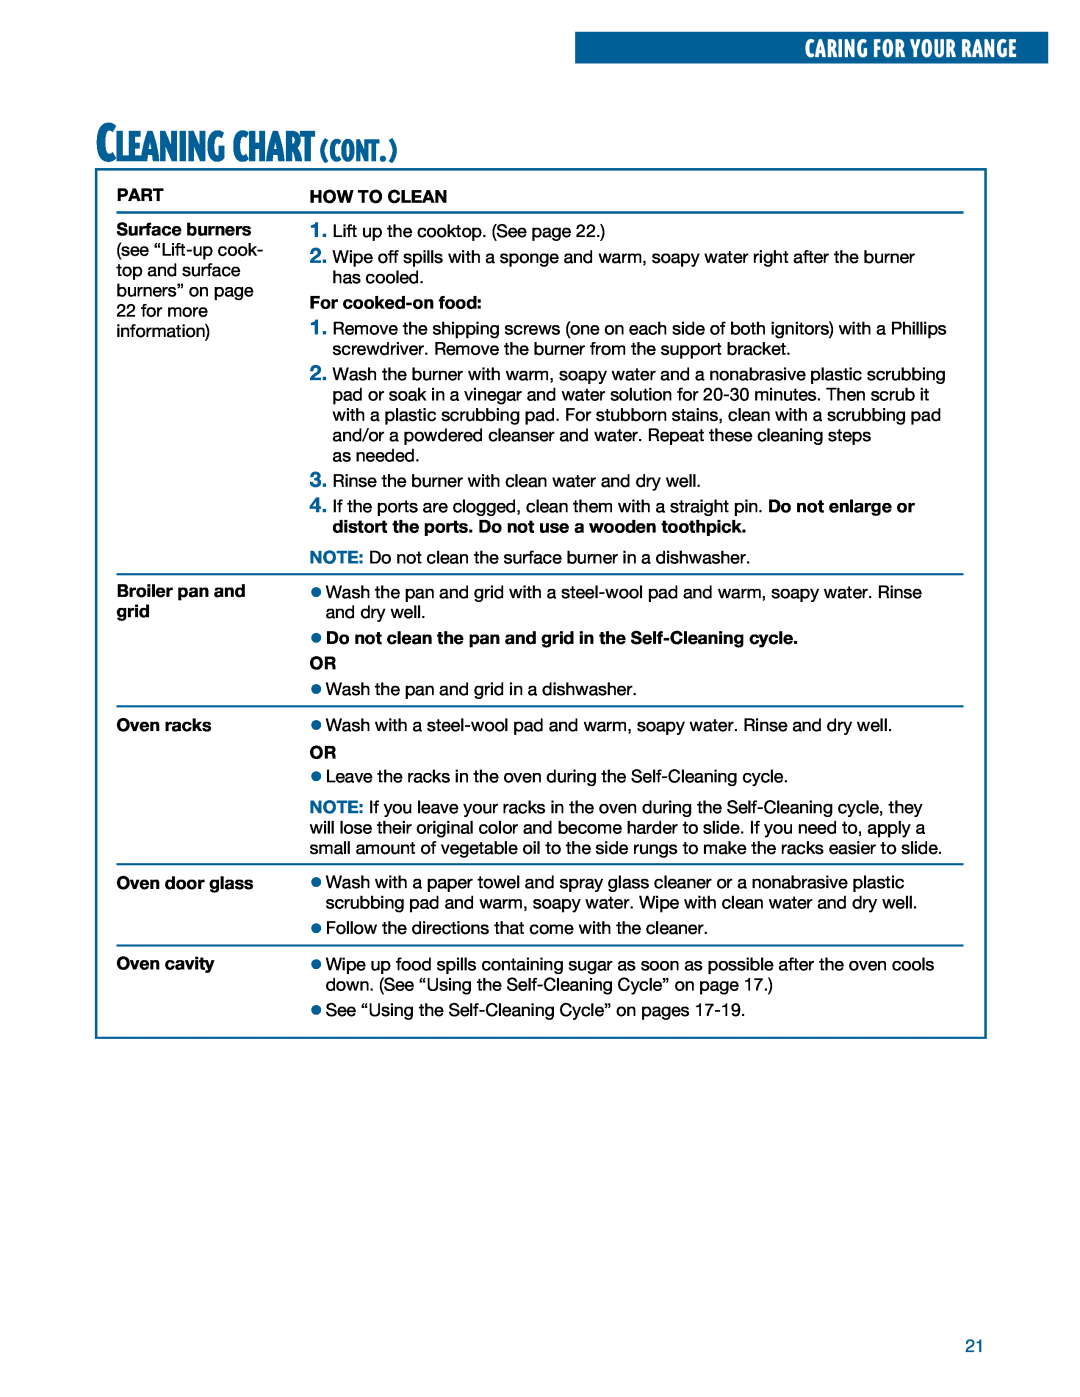 Whirlpool SF350BEE warranty Cleaning Chart Cont, Caring For Your Range 